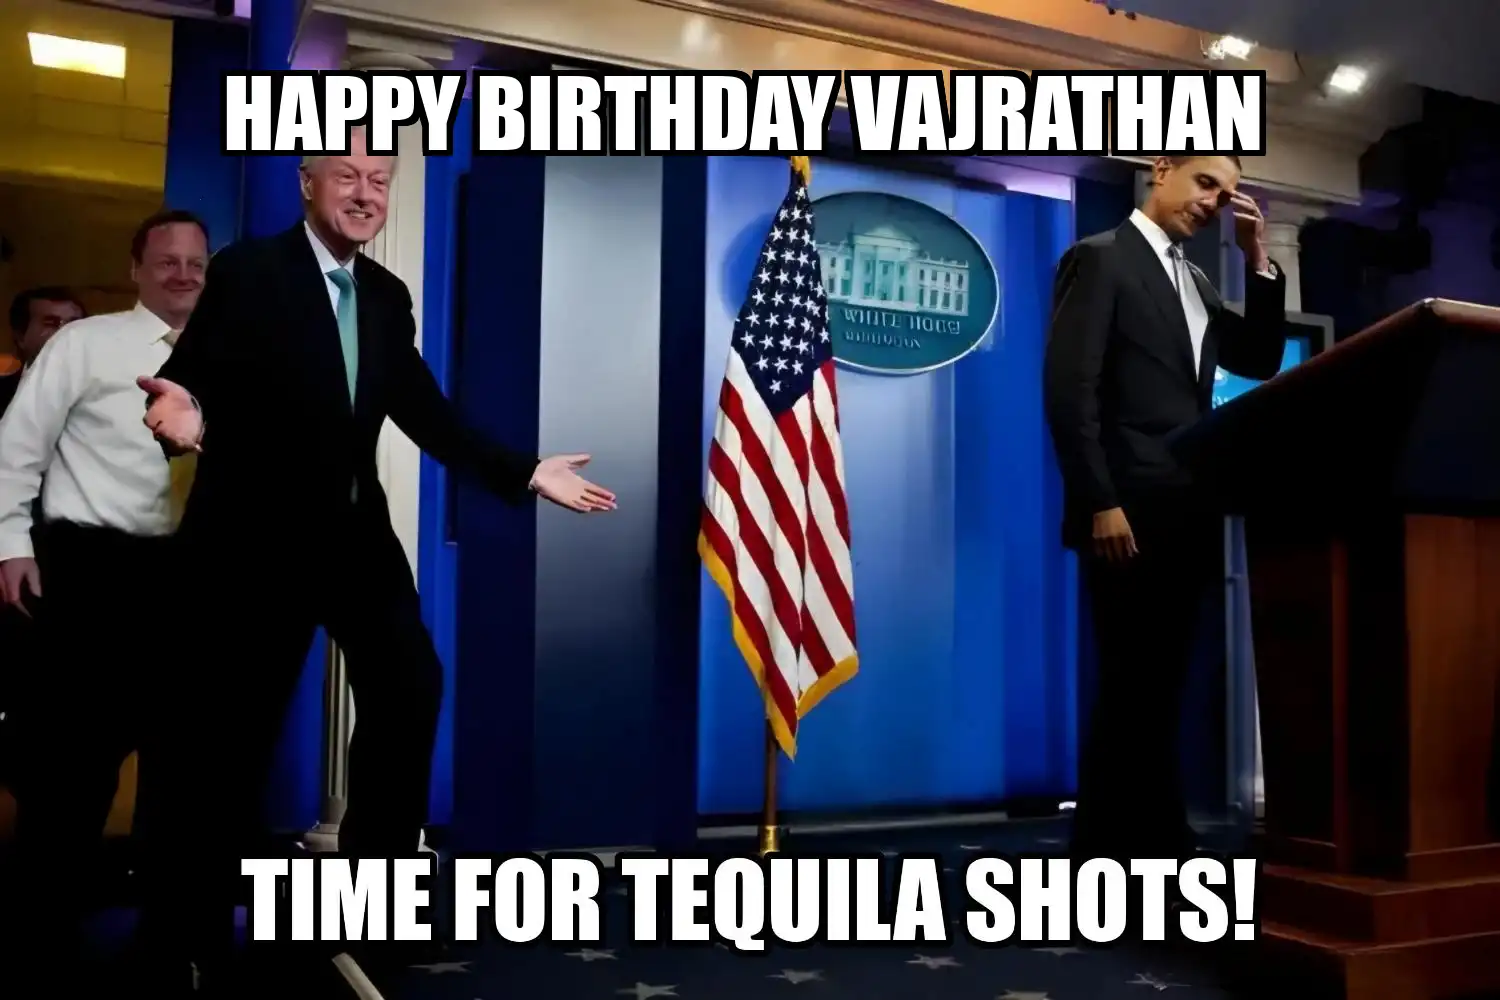 Happy Birthday Vajrathan Time For Tequila Shots Memes